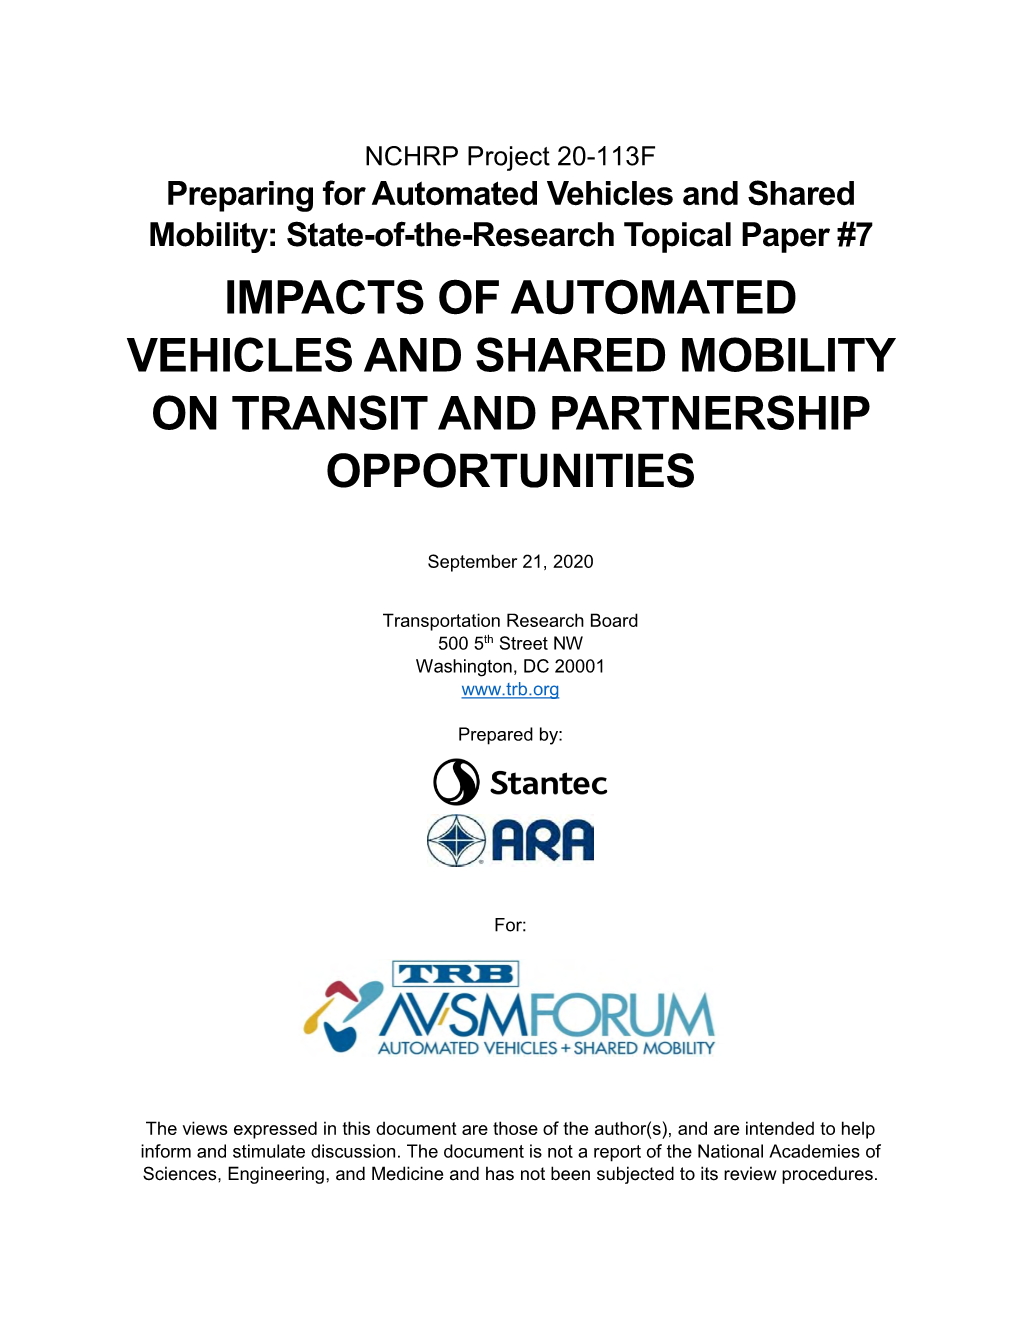 Impacts of Automated Vehicles and Shared Mobility on Transit and Partnership Opportunities